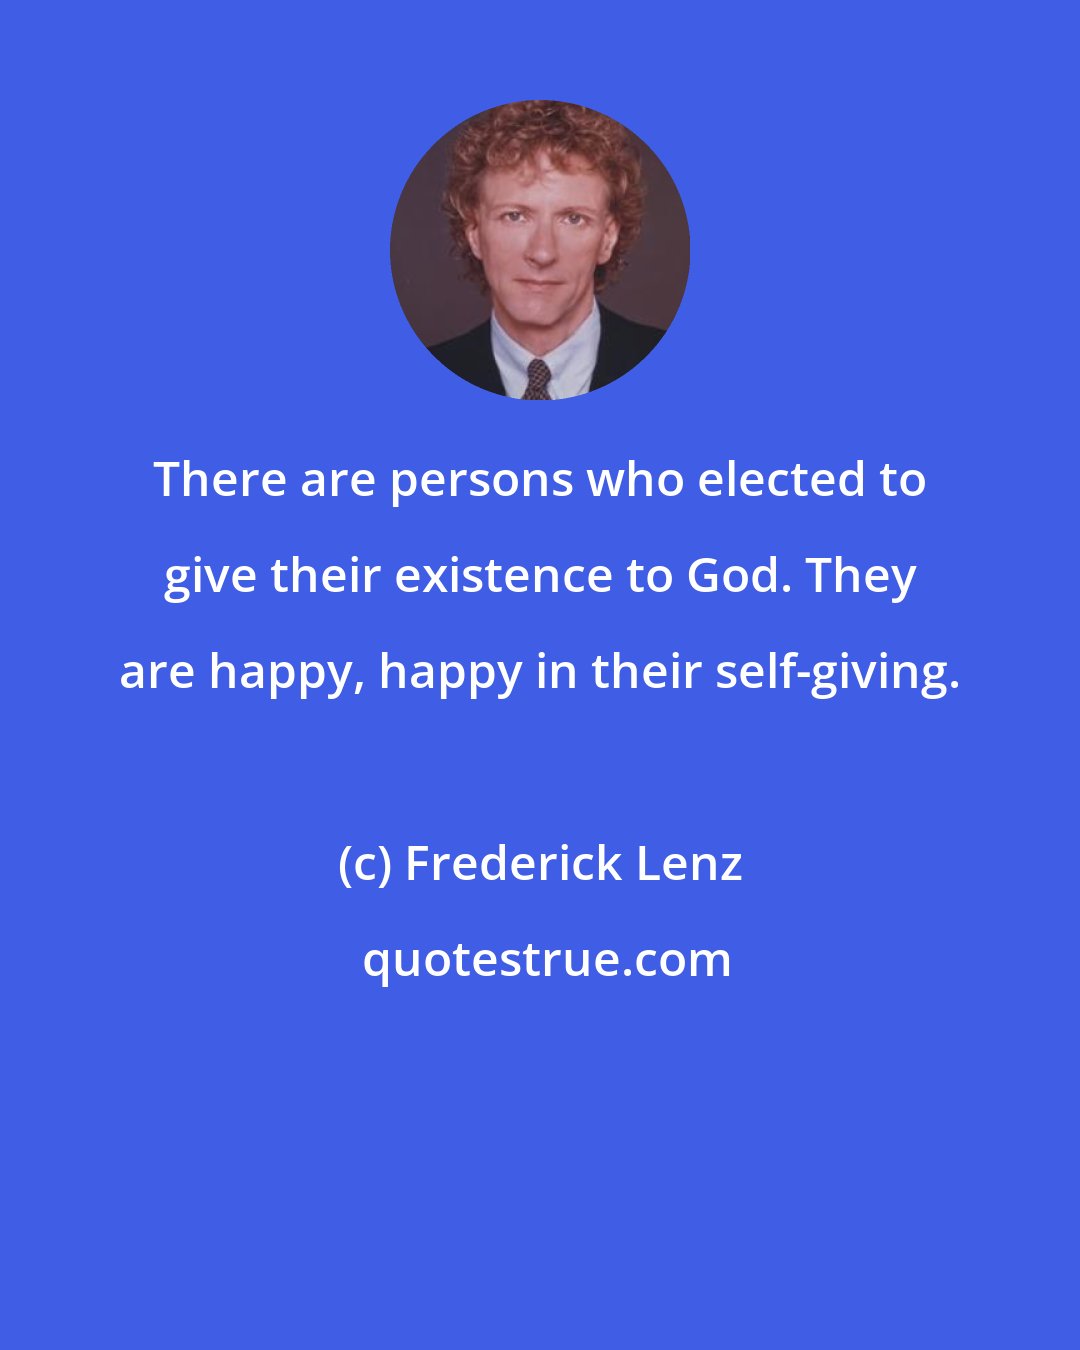 Frederick Lenz: There are persons who elected to give their existence to God. They are happy, happy in their self-giving.